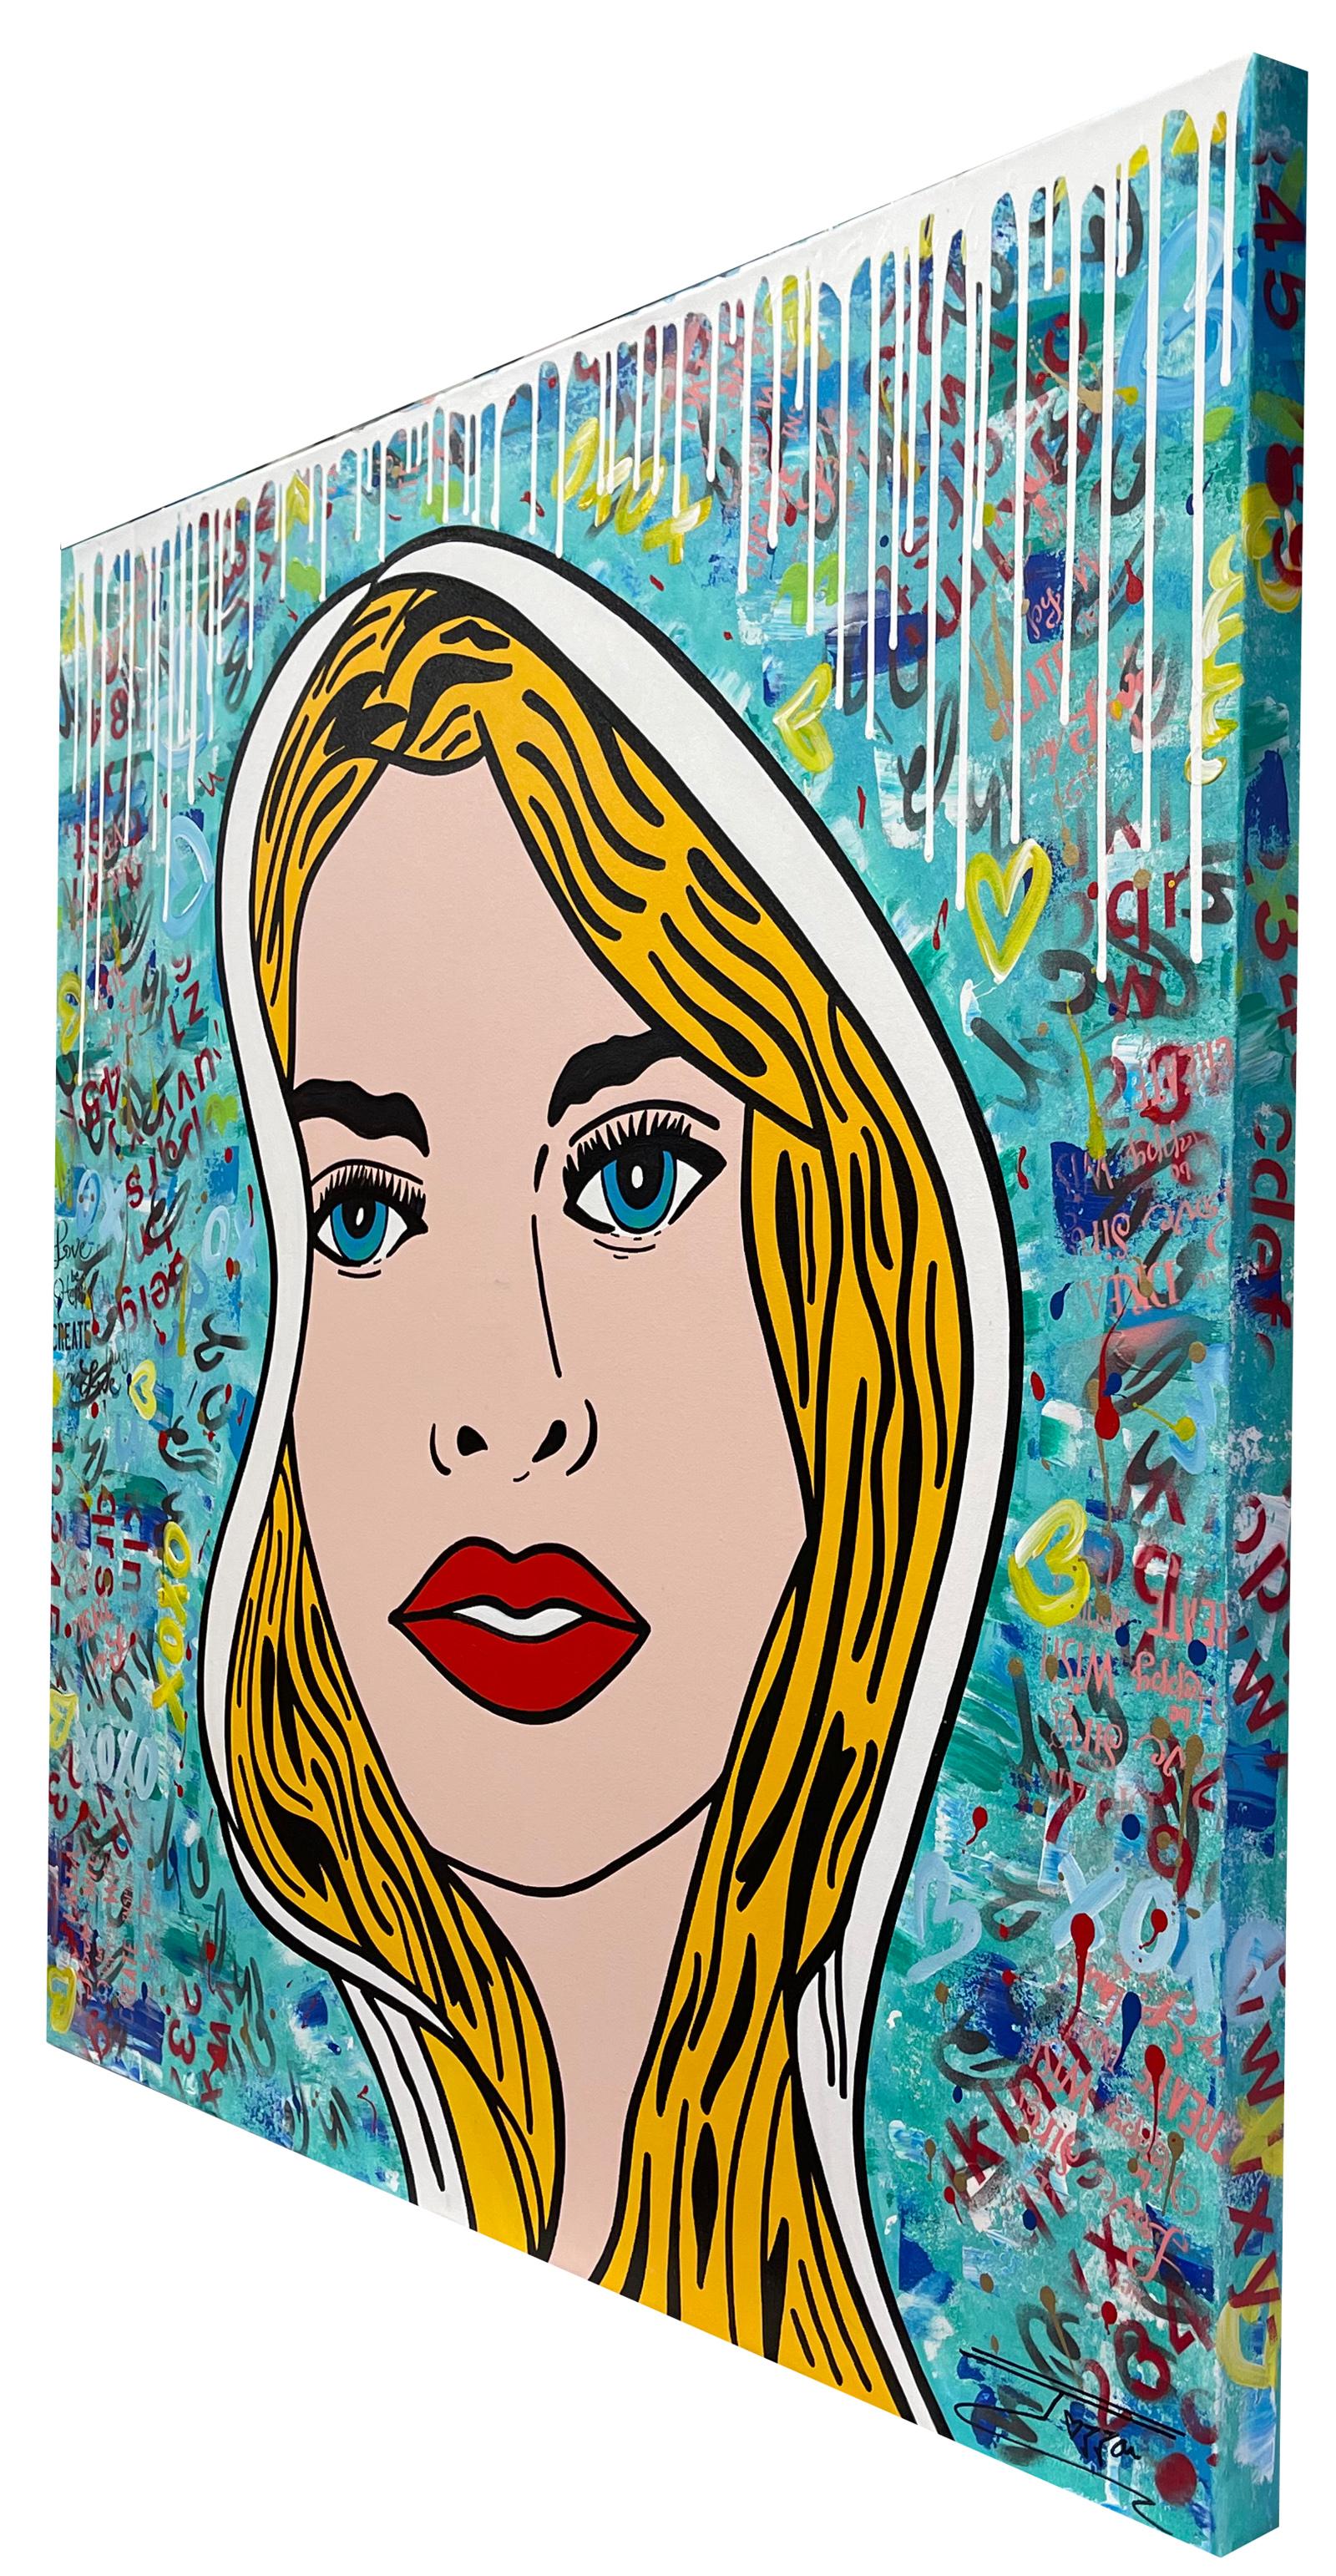 Artist: Jozza
Title: Untitled Blondie
Medium: Original Acrylic on Canvas
Signature: Hand signed By Artist
Size: Approximately 48x48 inches
Framed: Gallery Wrapped with framing unnecessary
Biography: Jozza was born in 1958 in Hidrolandia, a small